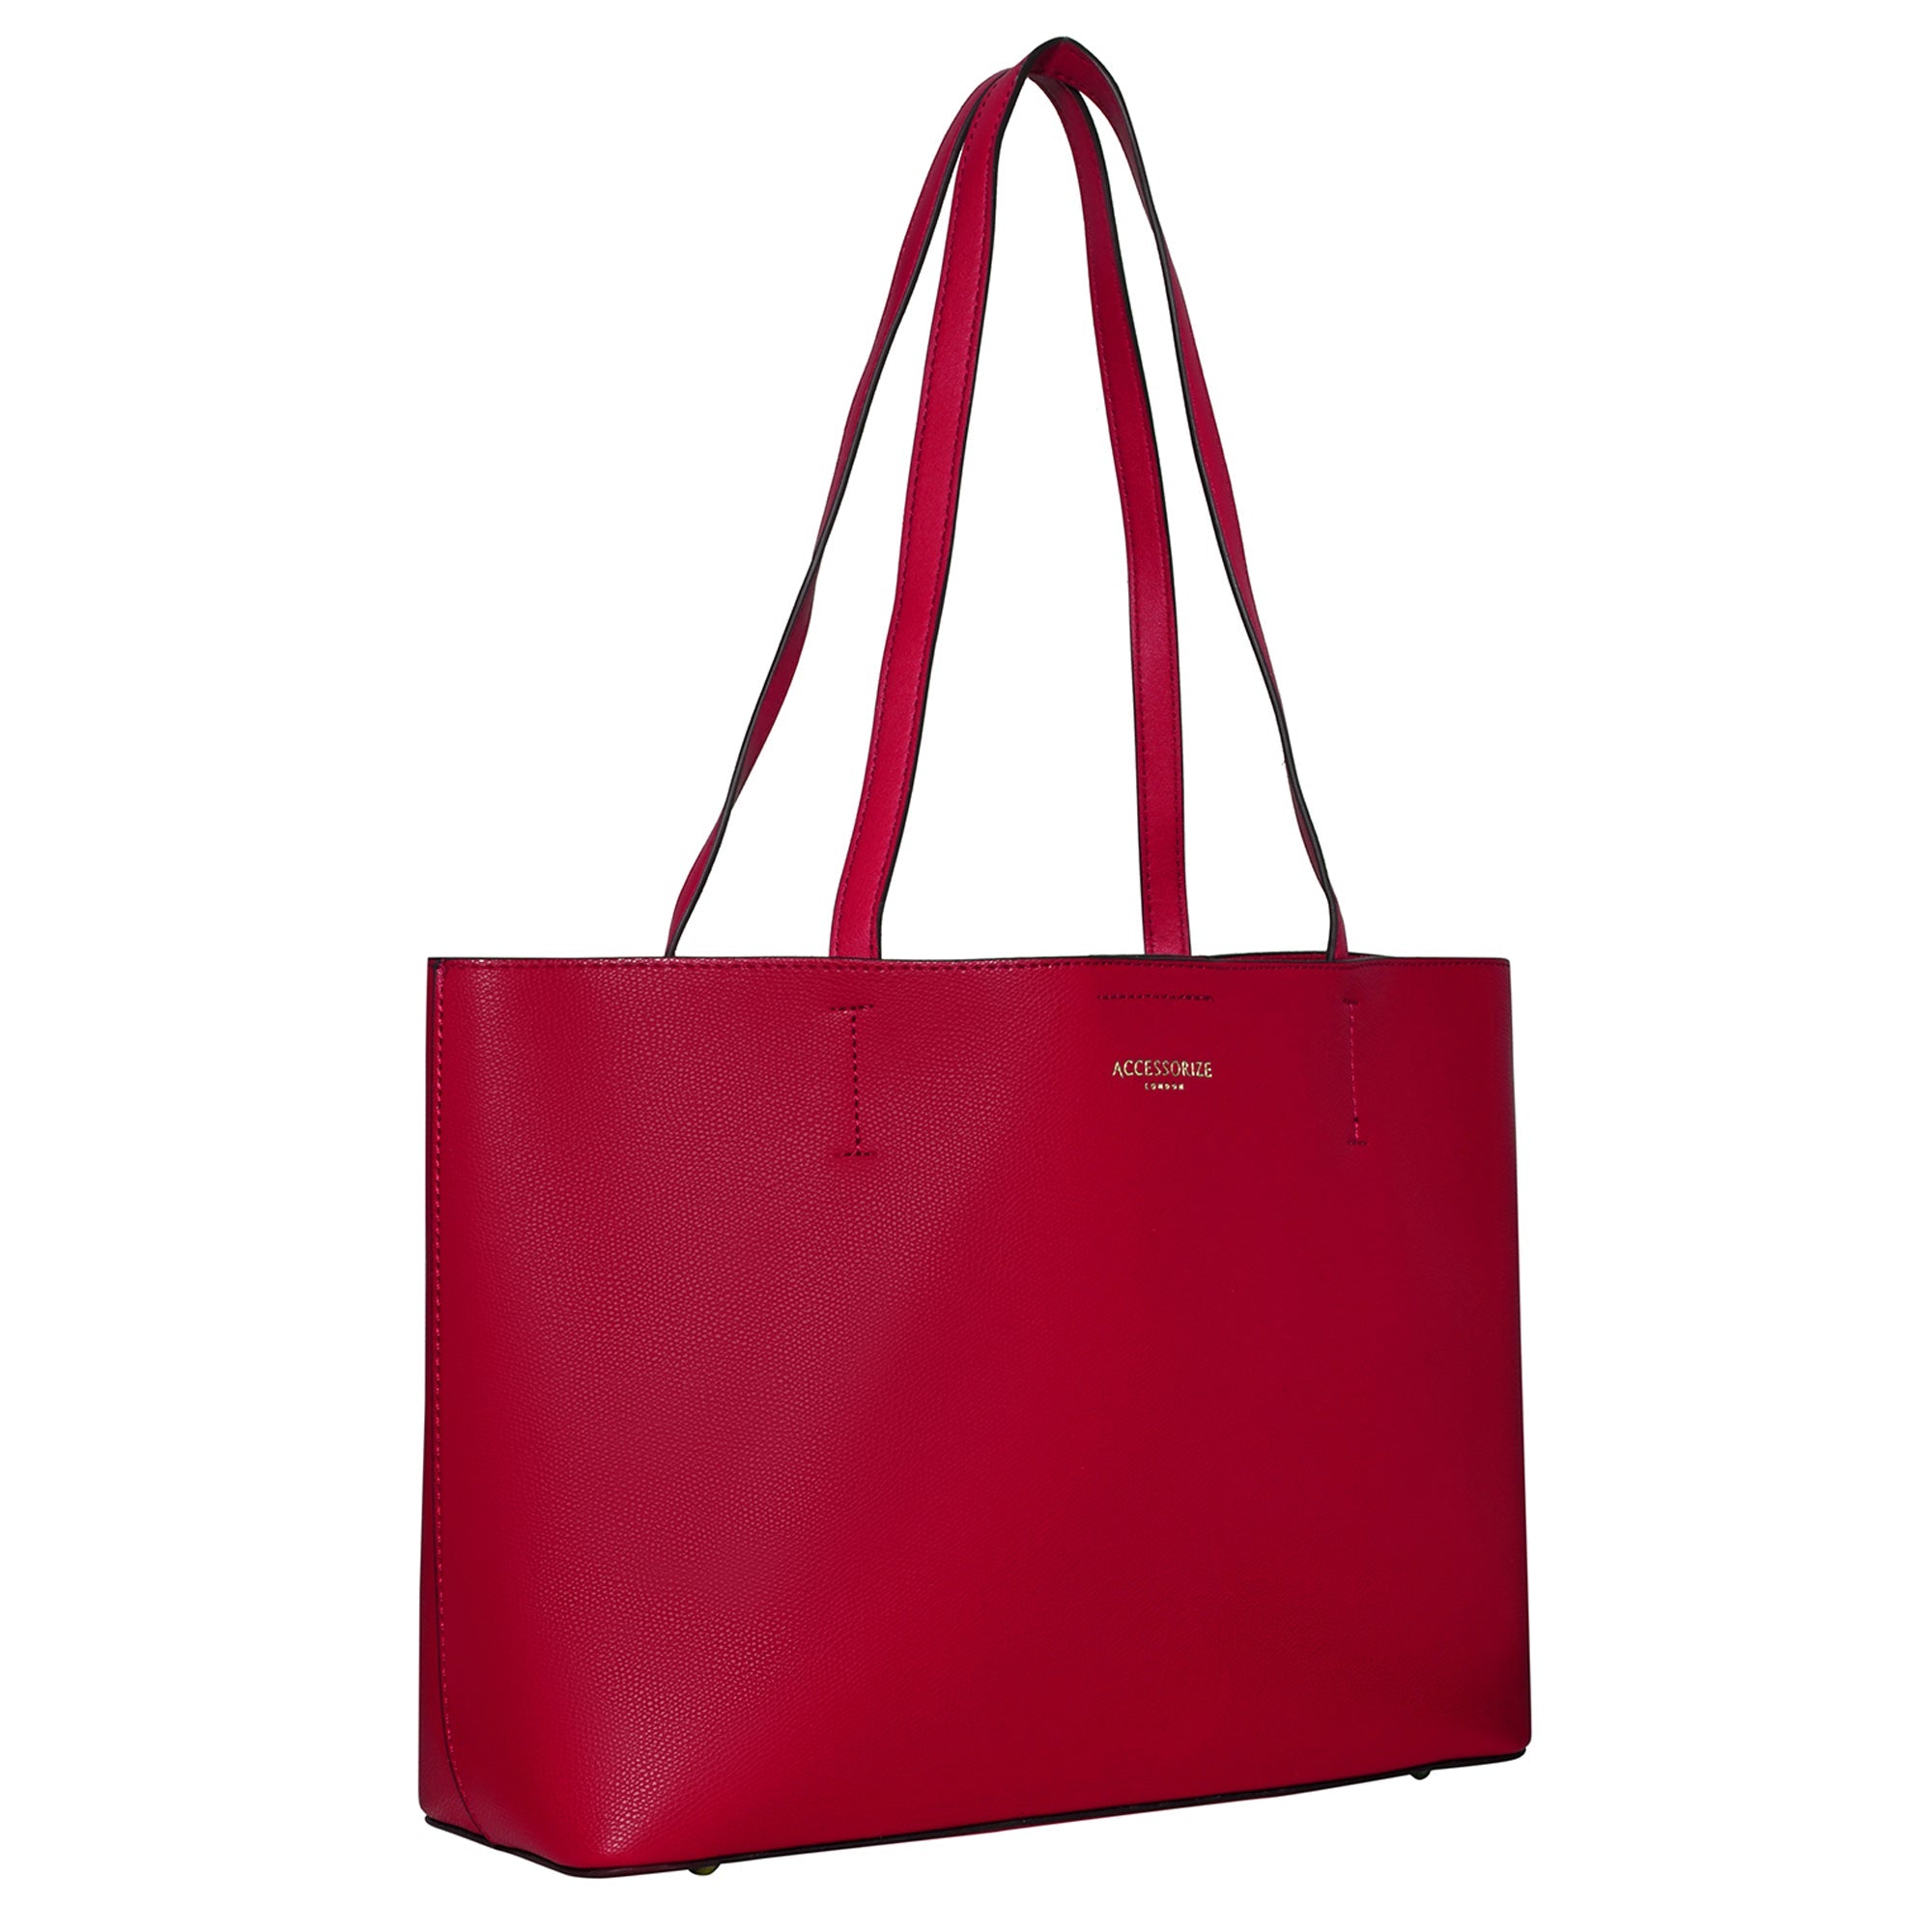 Accessorize London Women's Faux Leather Red Leo Tote Bag